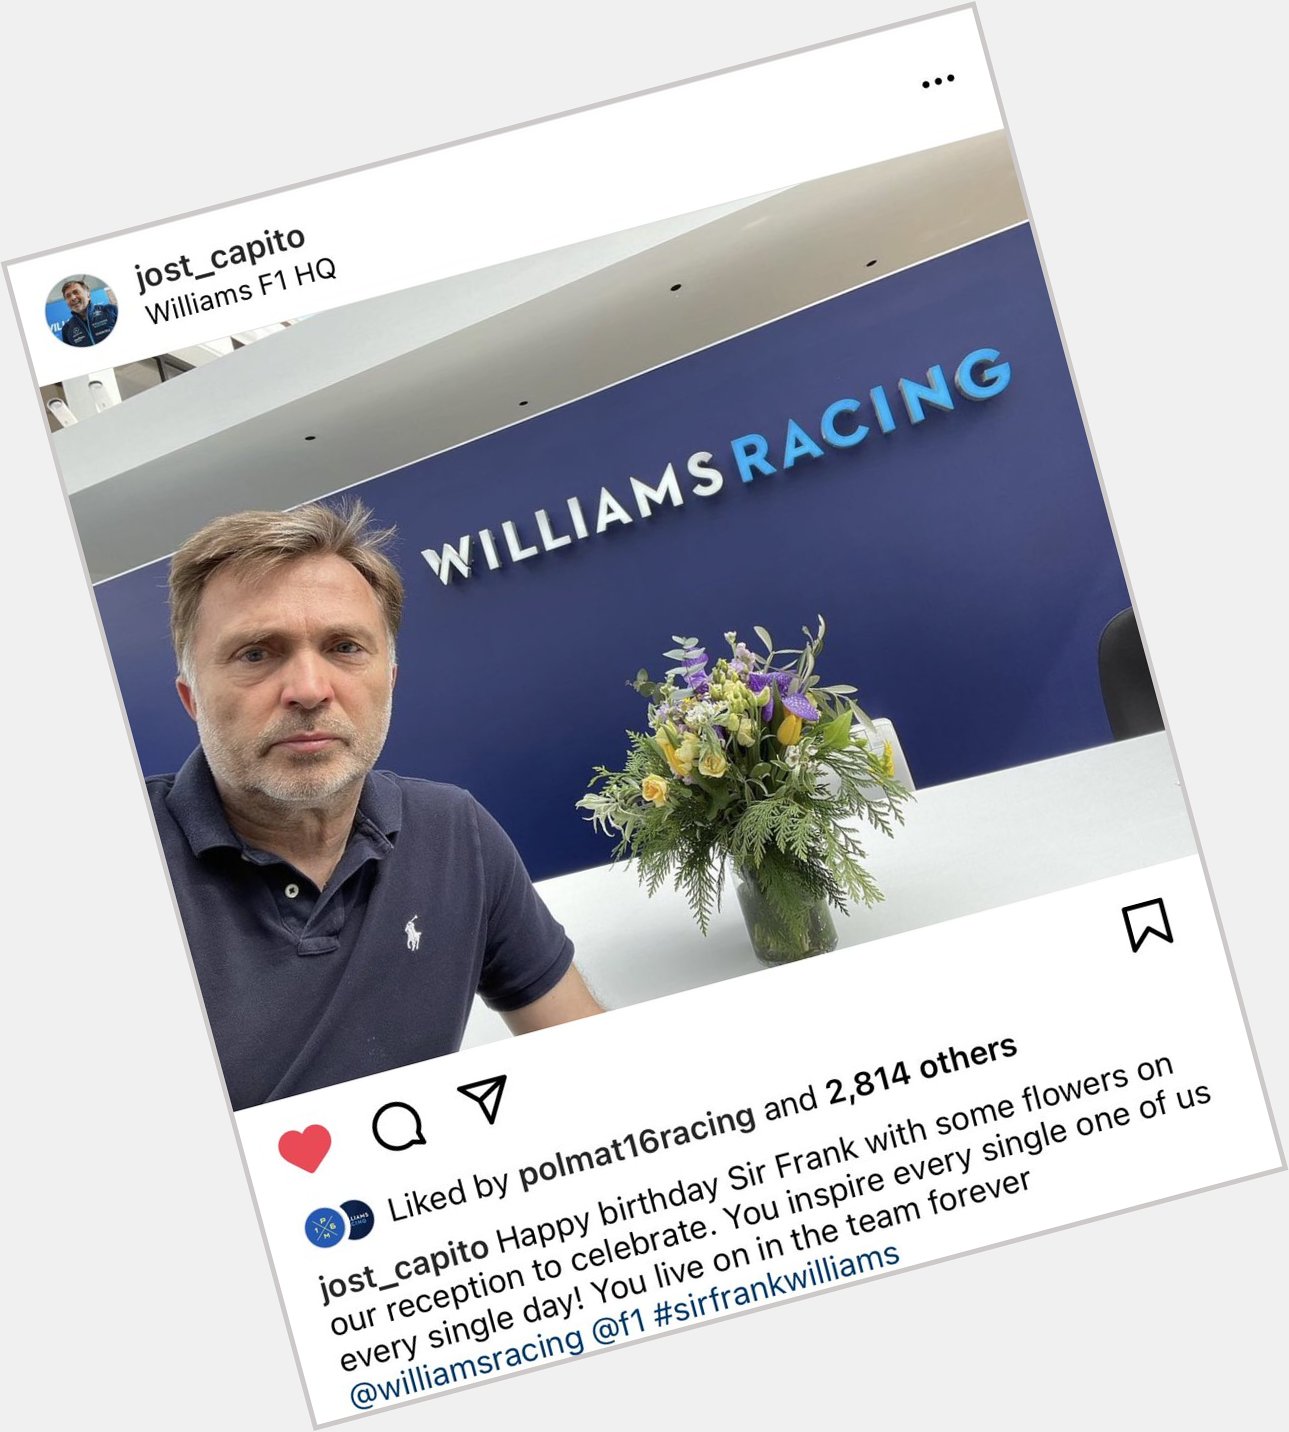 Happy birthday sir frank Williams!!! (This post was so cute I had to share) 